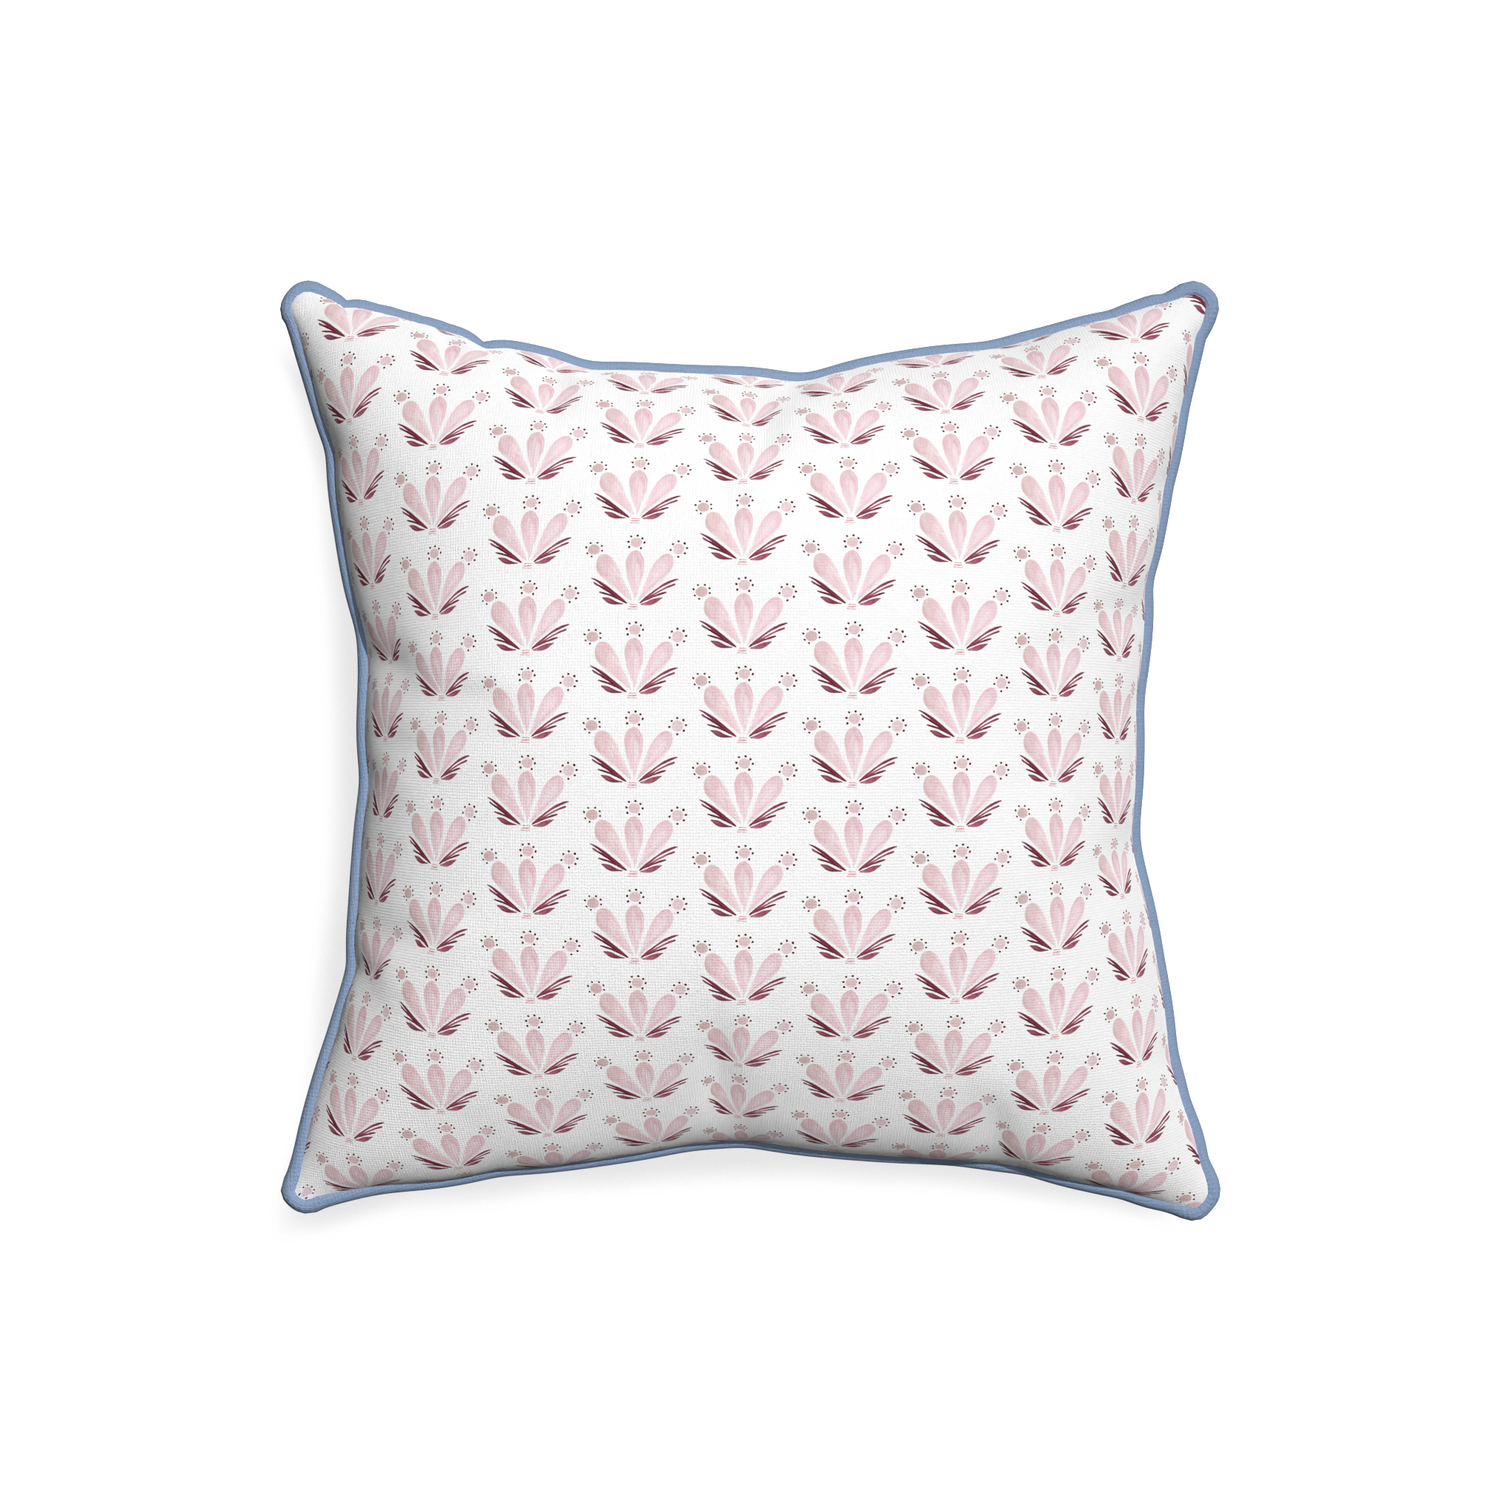 20-square serena pink custom pillow with sky piping on white background